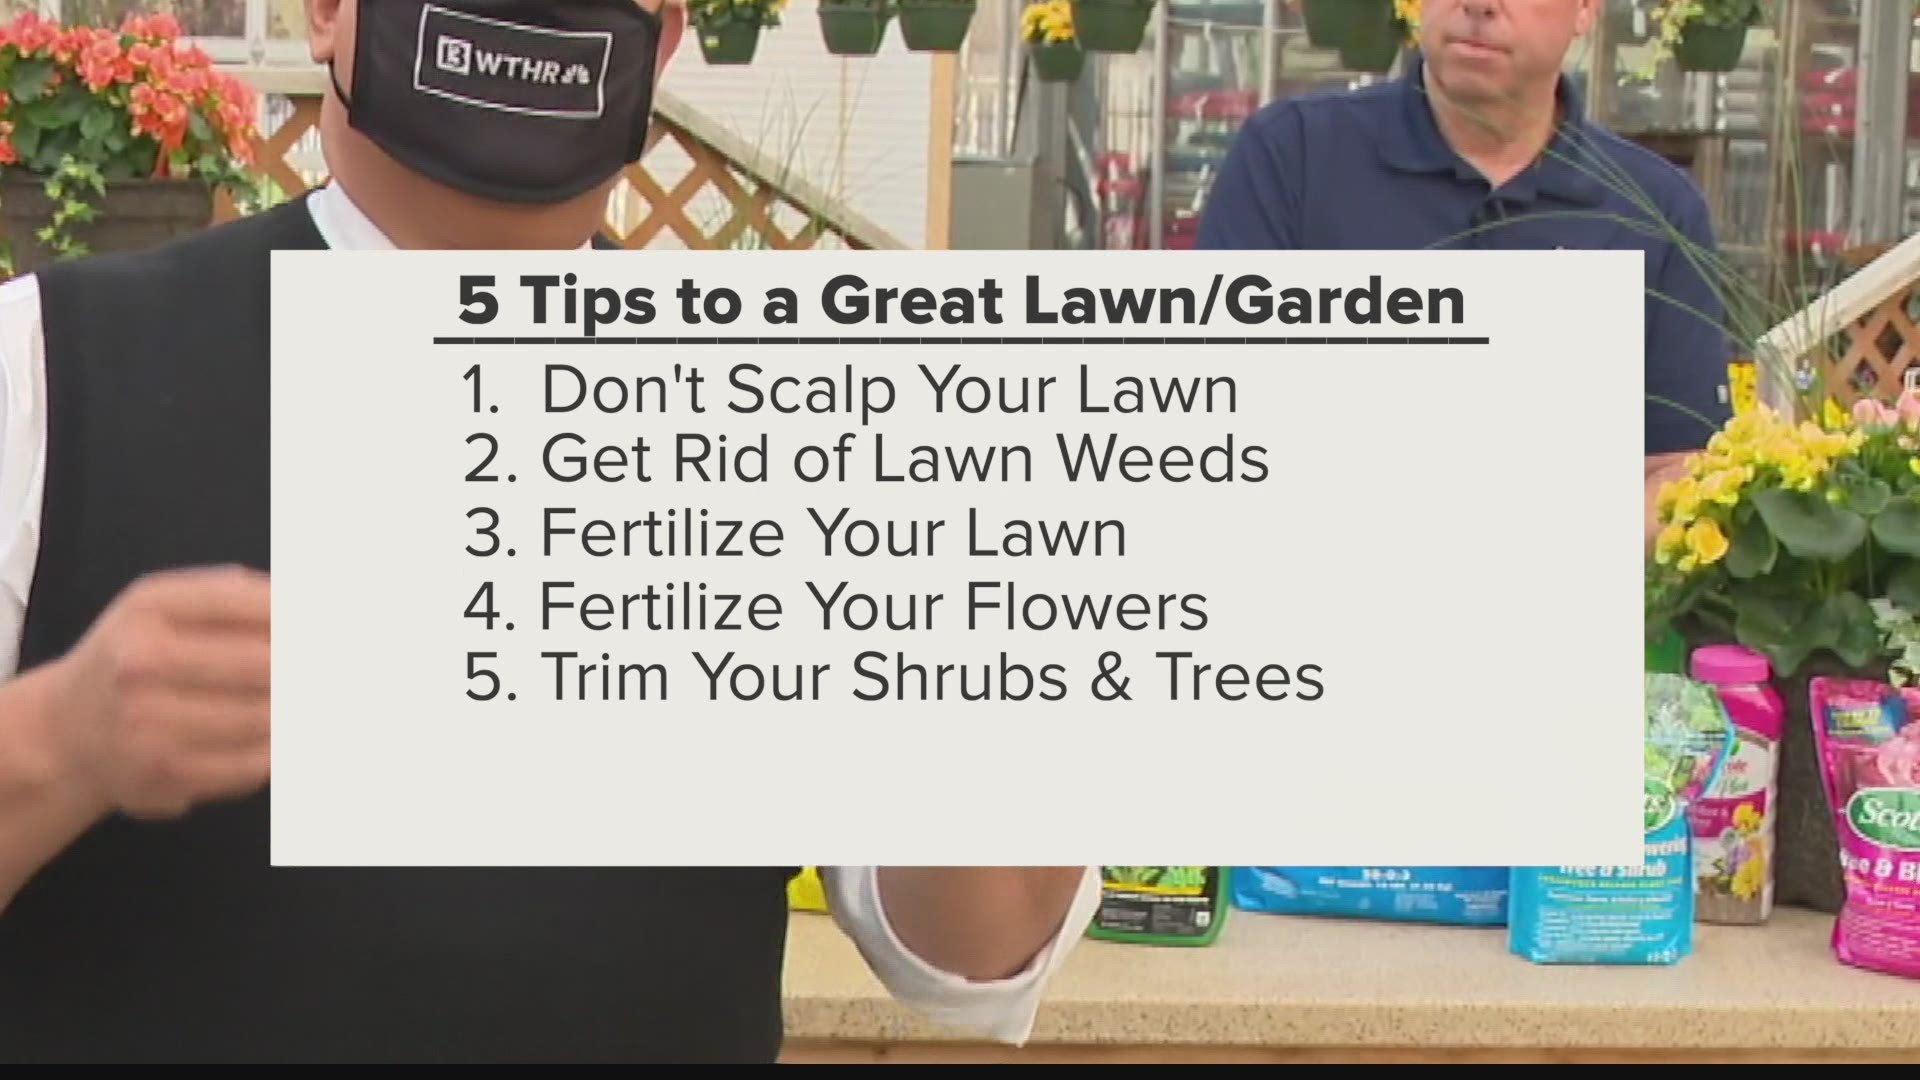 Pat Sullivan shares five tips to help out your landscaping this spring.